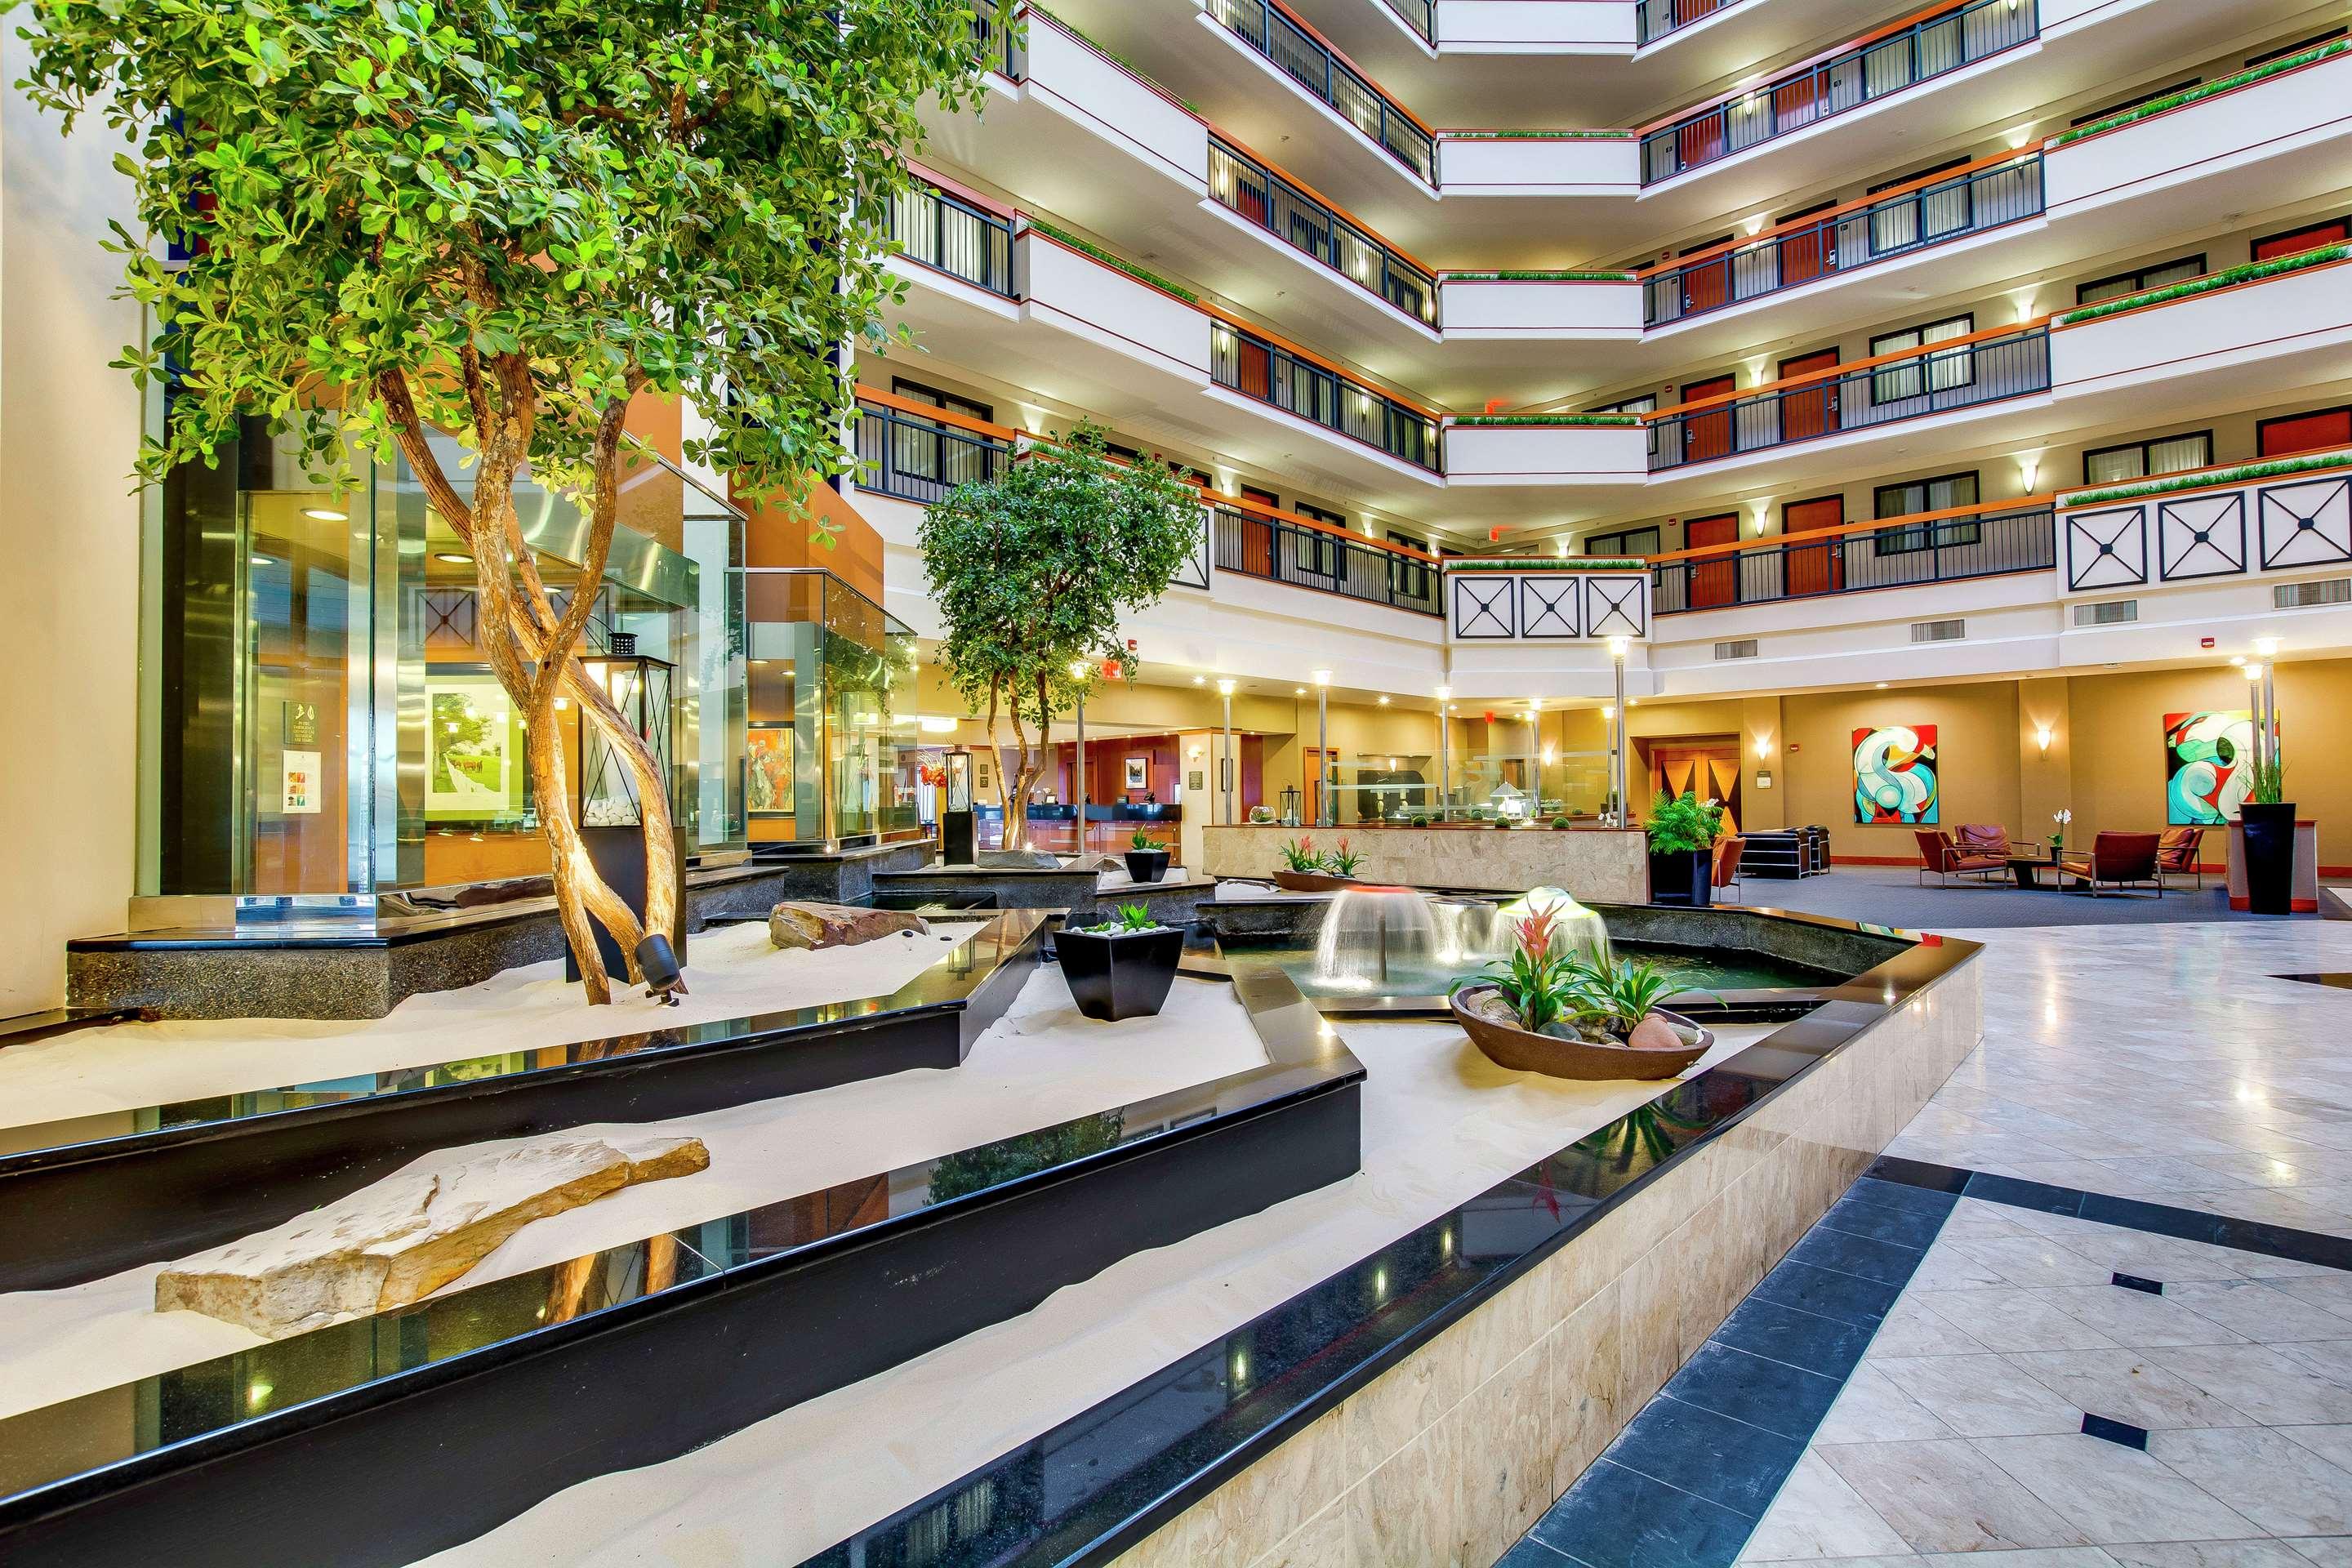 Embassy Suites by Hilton Washington D.C. – Convention Center in Washington:  Find Hotel Reviews, Rooms, and Prices on Hotels.com